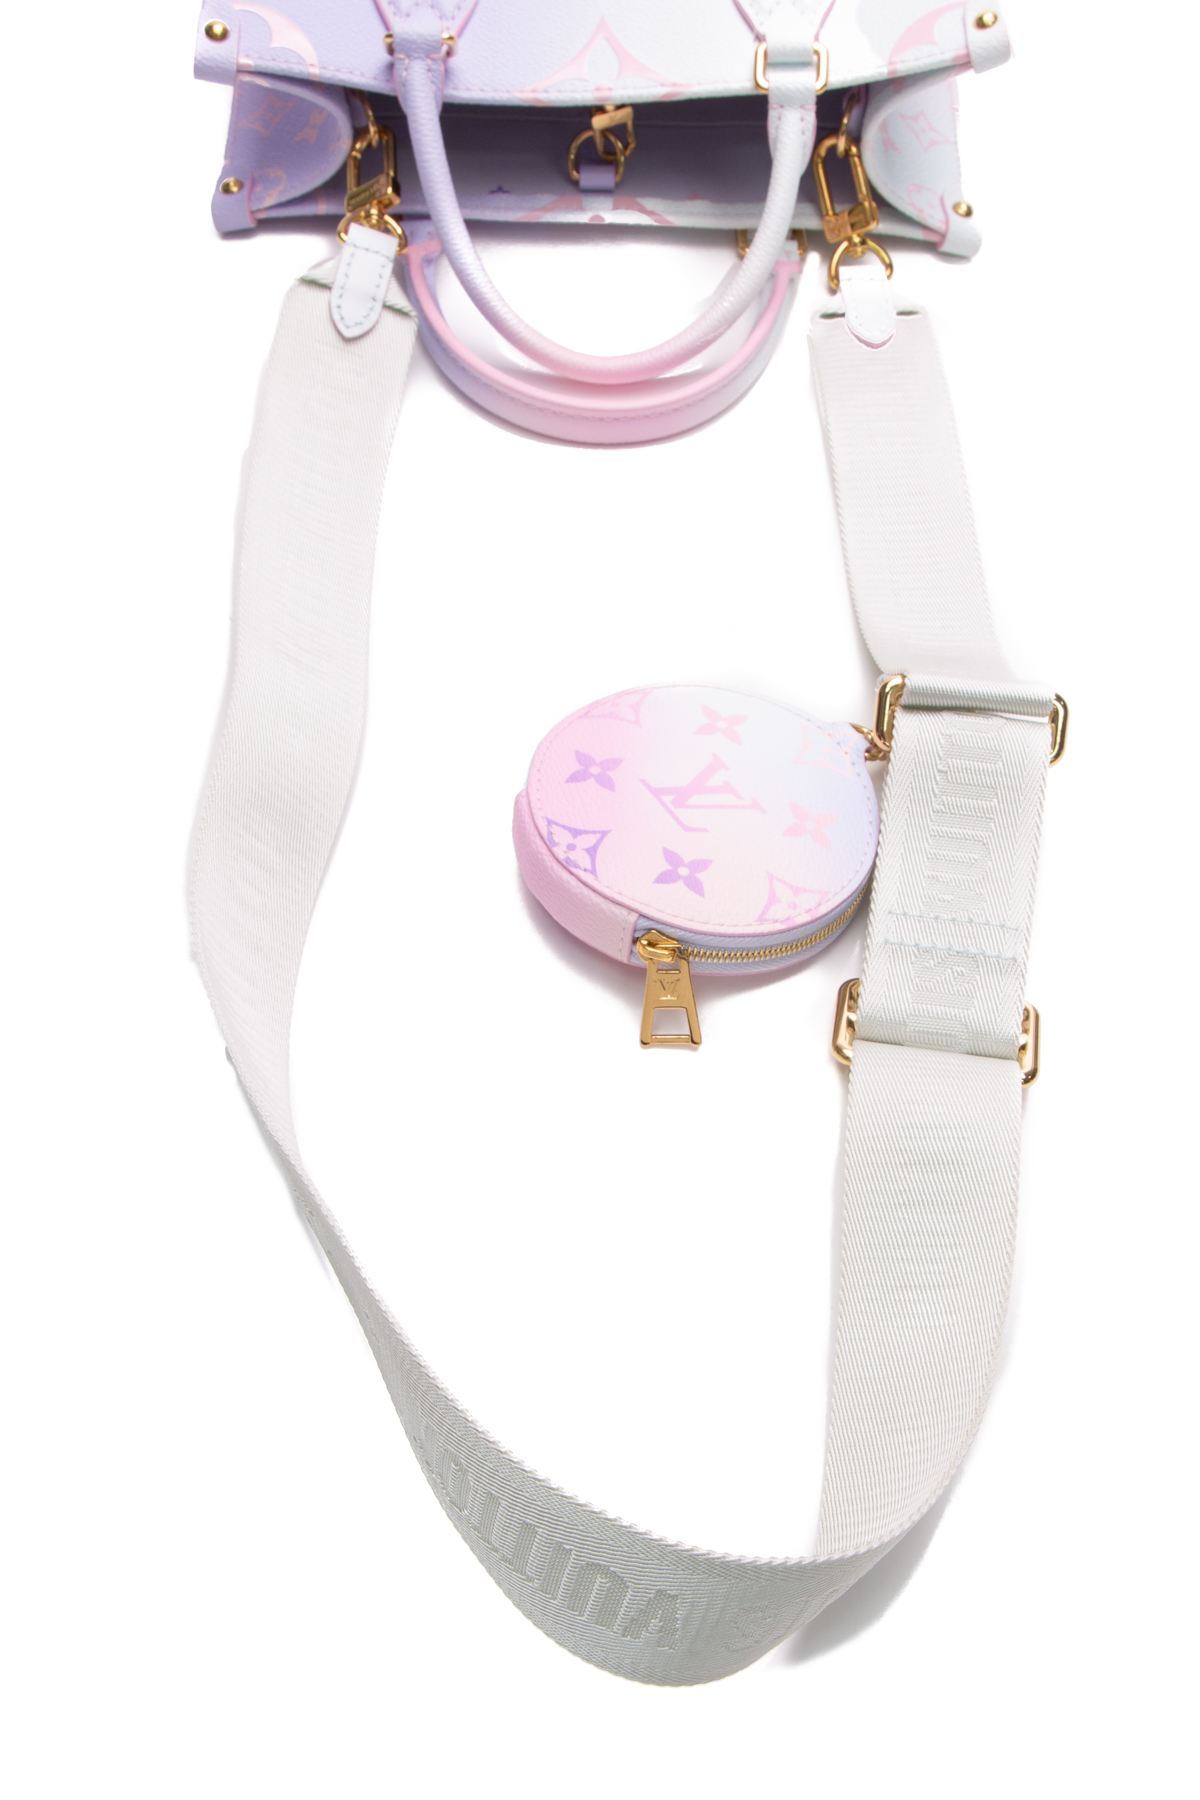 Louis Vuitton Onthego PM Sunrise Pastel Spring in the City